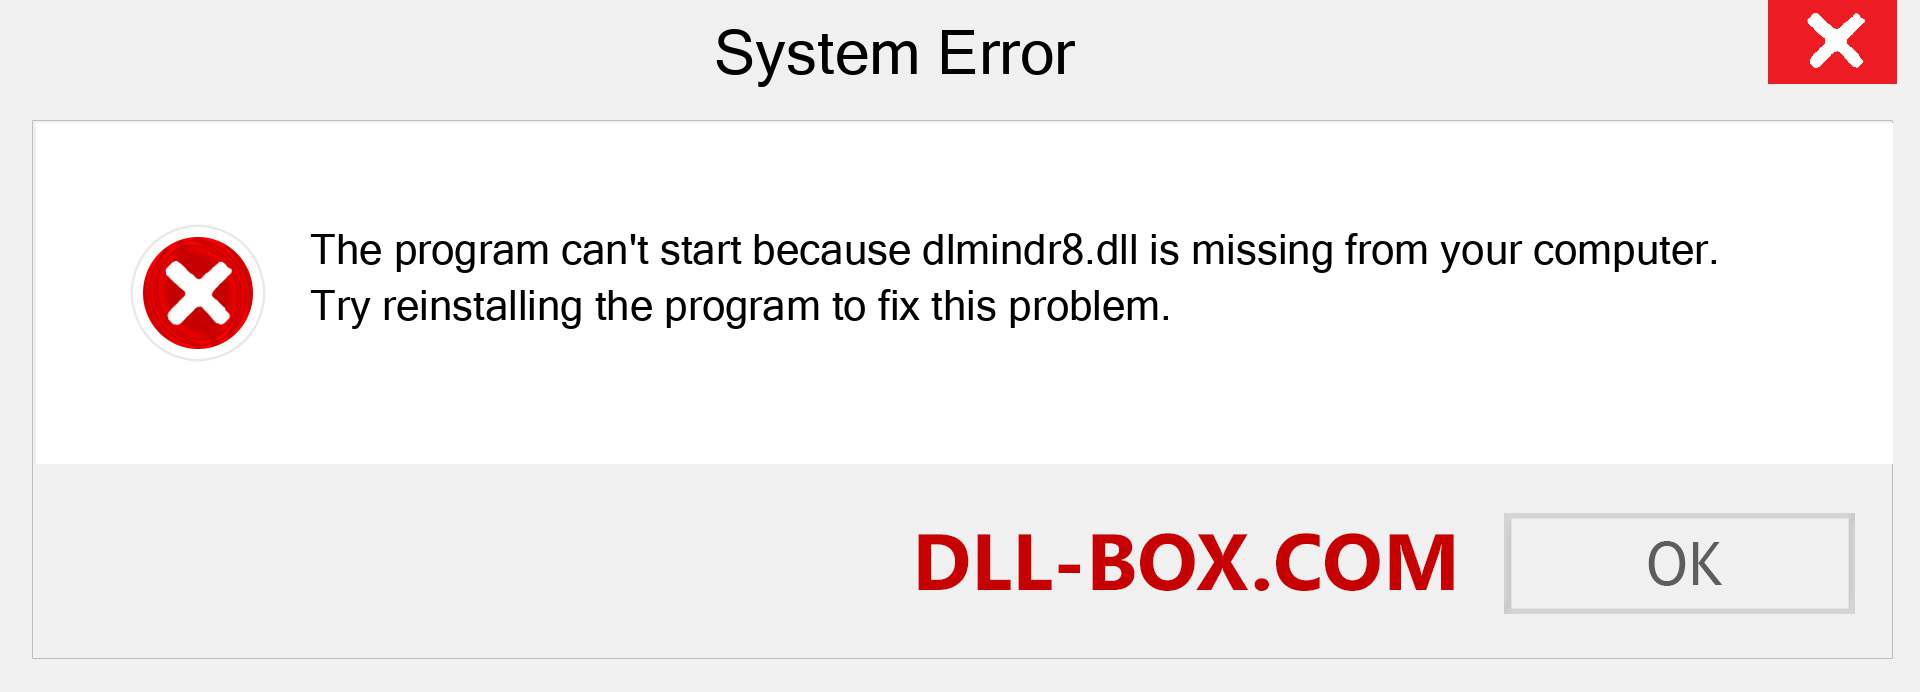  dlmindr8.dll file is missing?. Download for Windows 7, 8, 10 - Fix  dlmindr8 dll Missing Error on Windows, photos, images